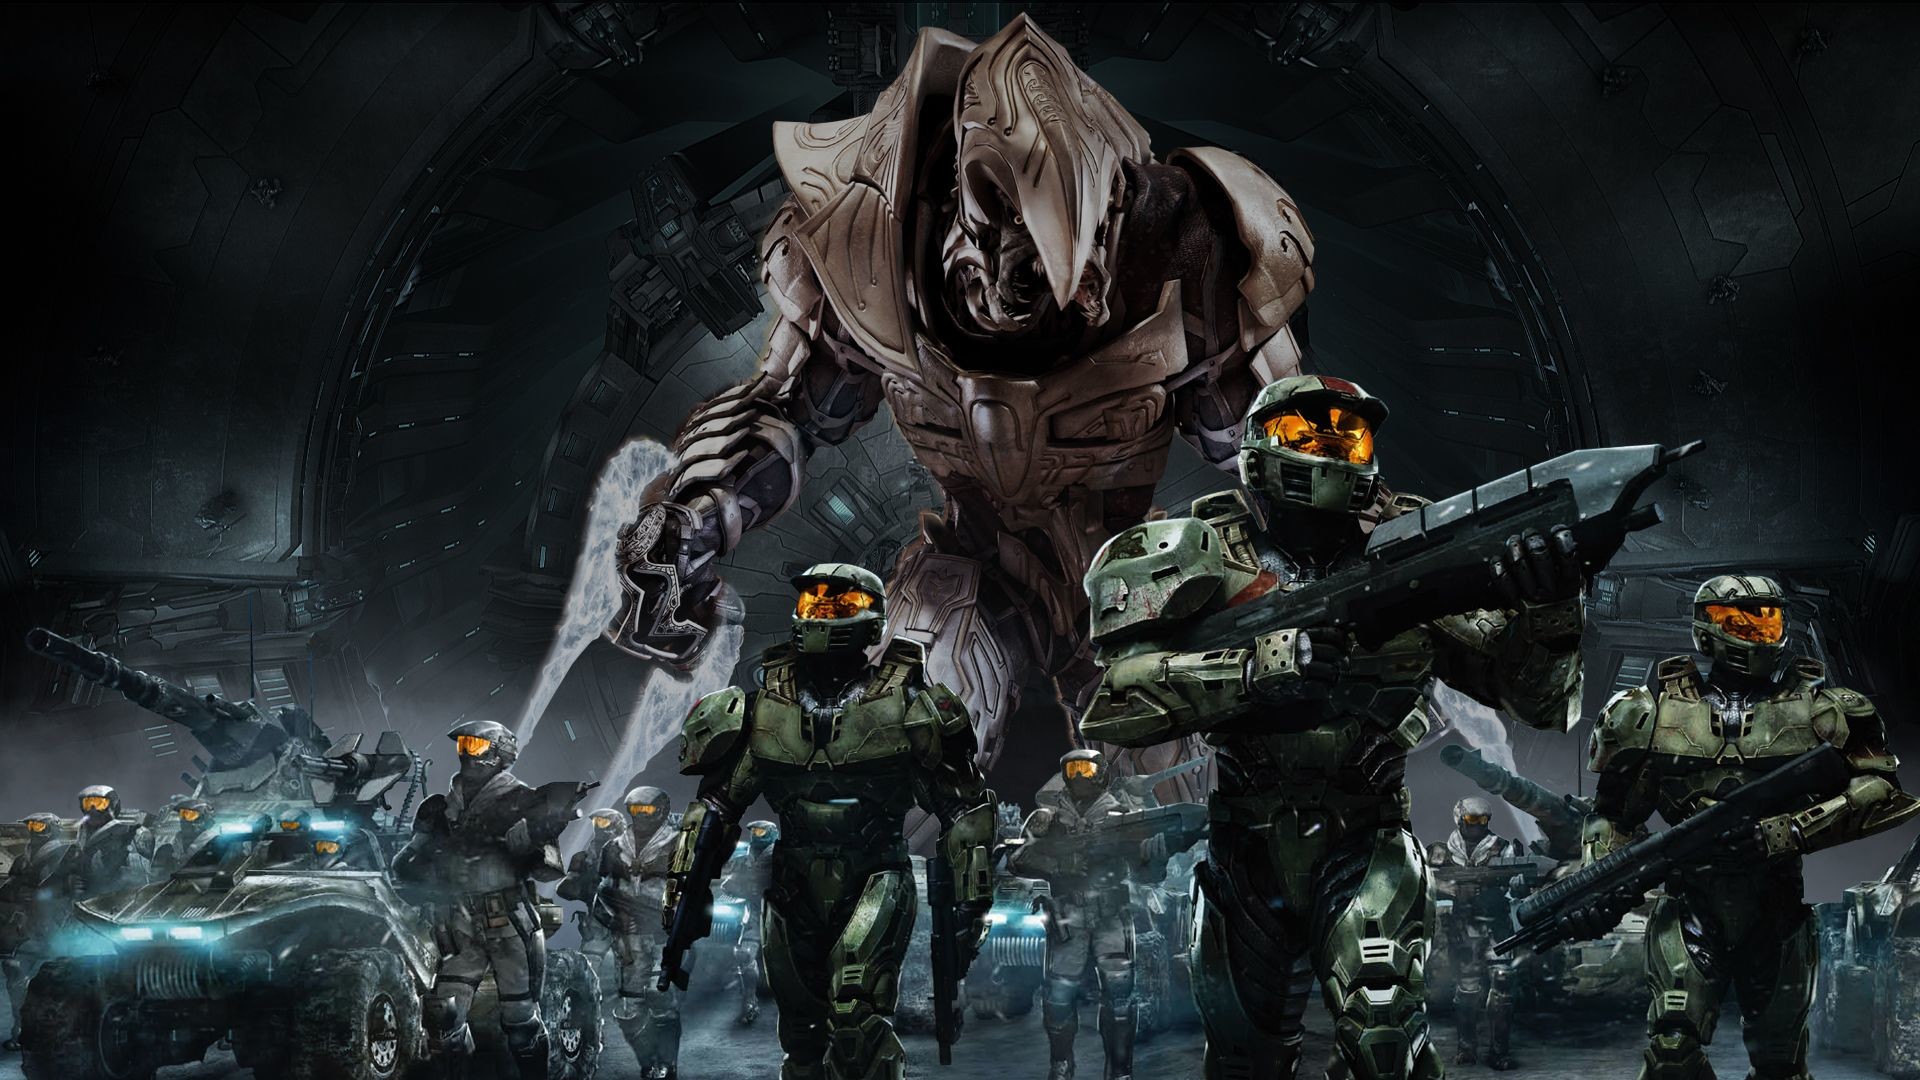 1920x1080 Halo Wallpapers – 967 Halo Wallpapers